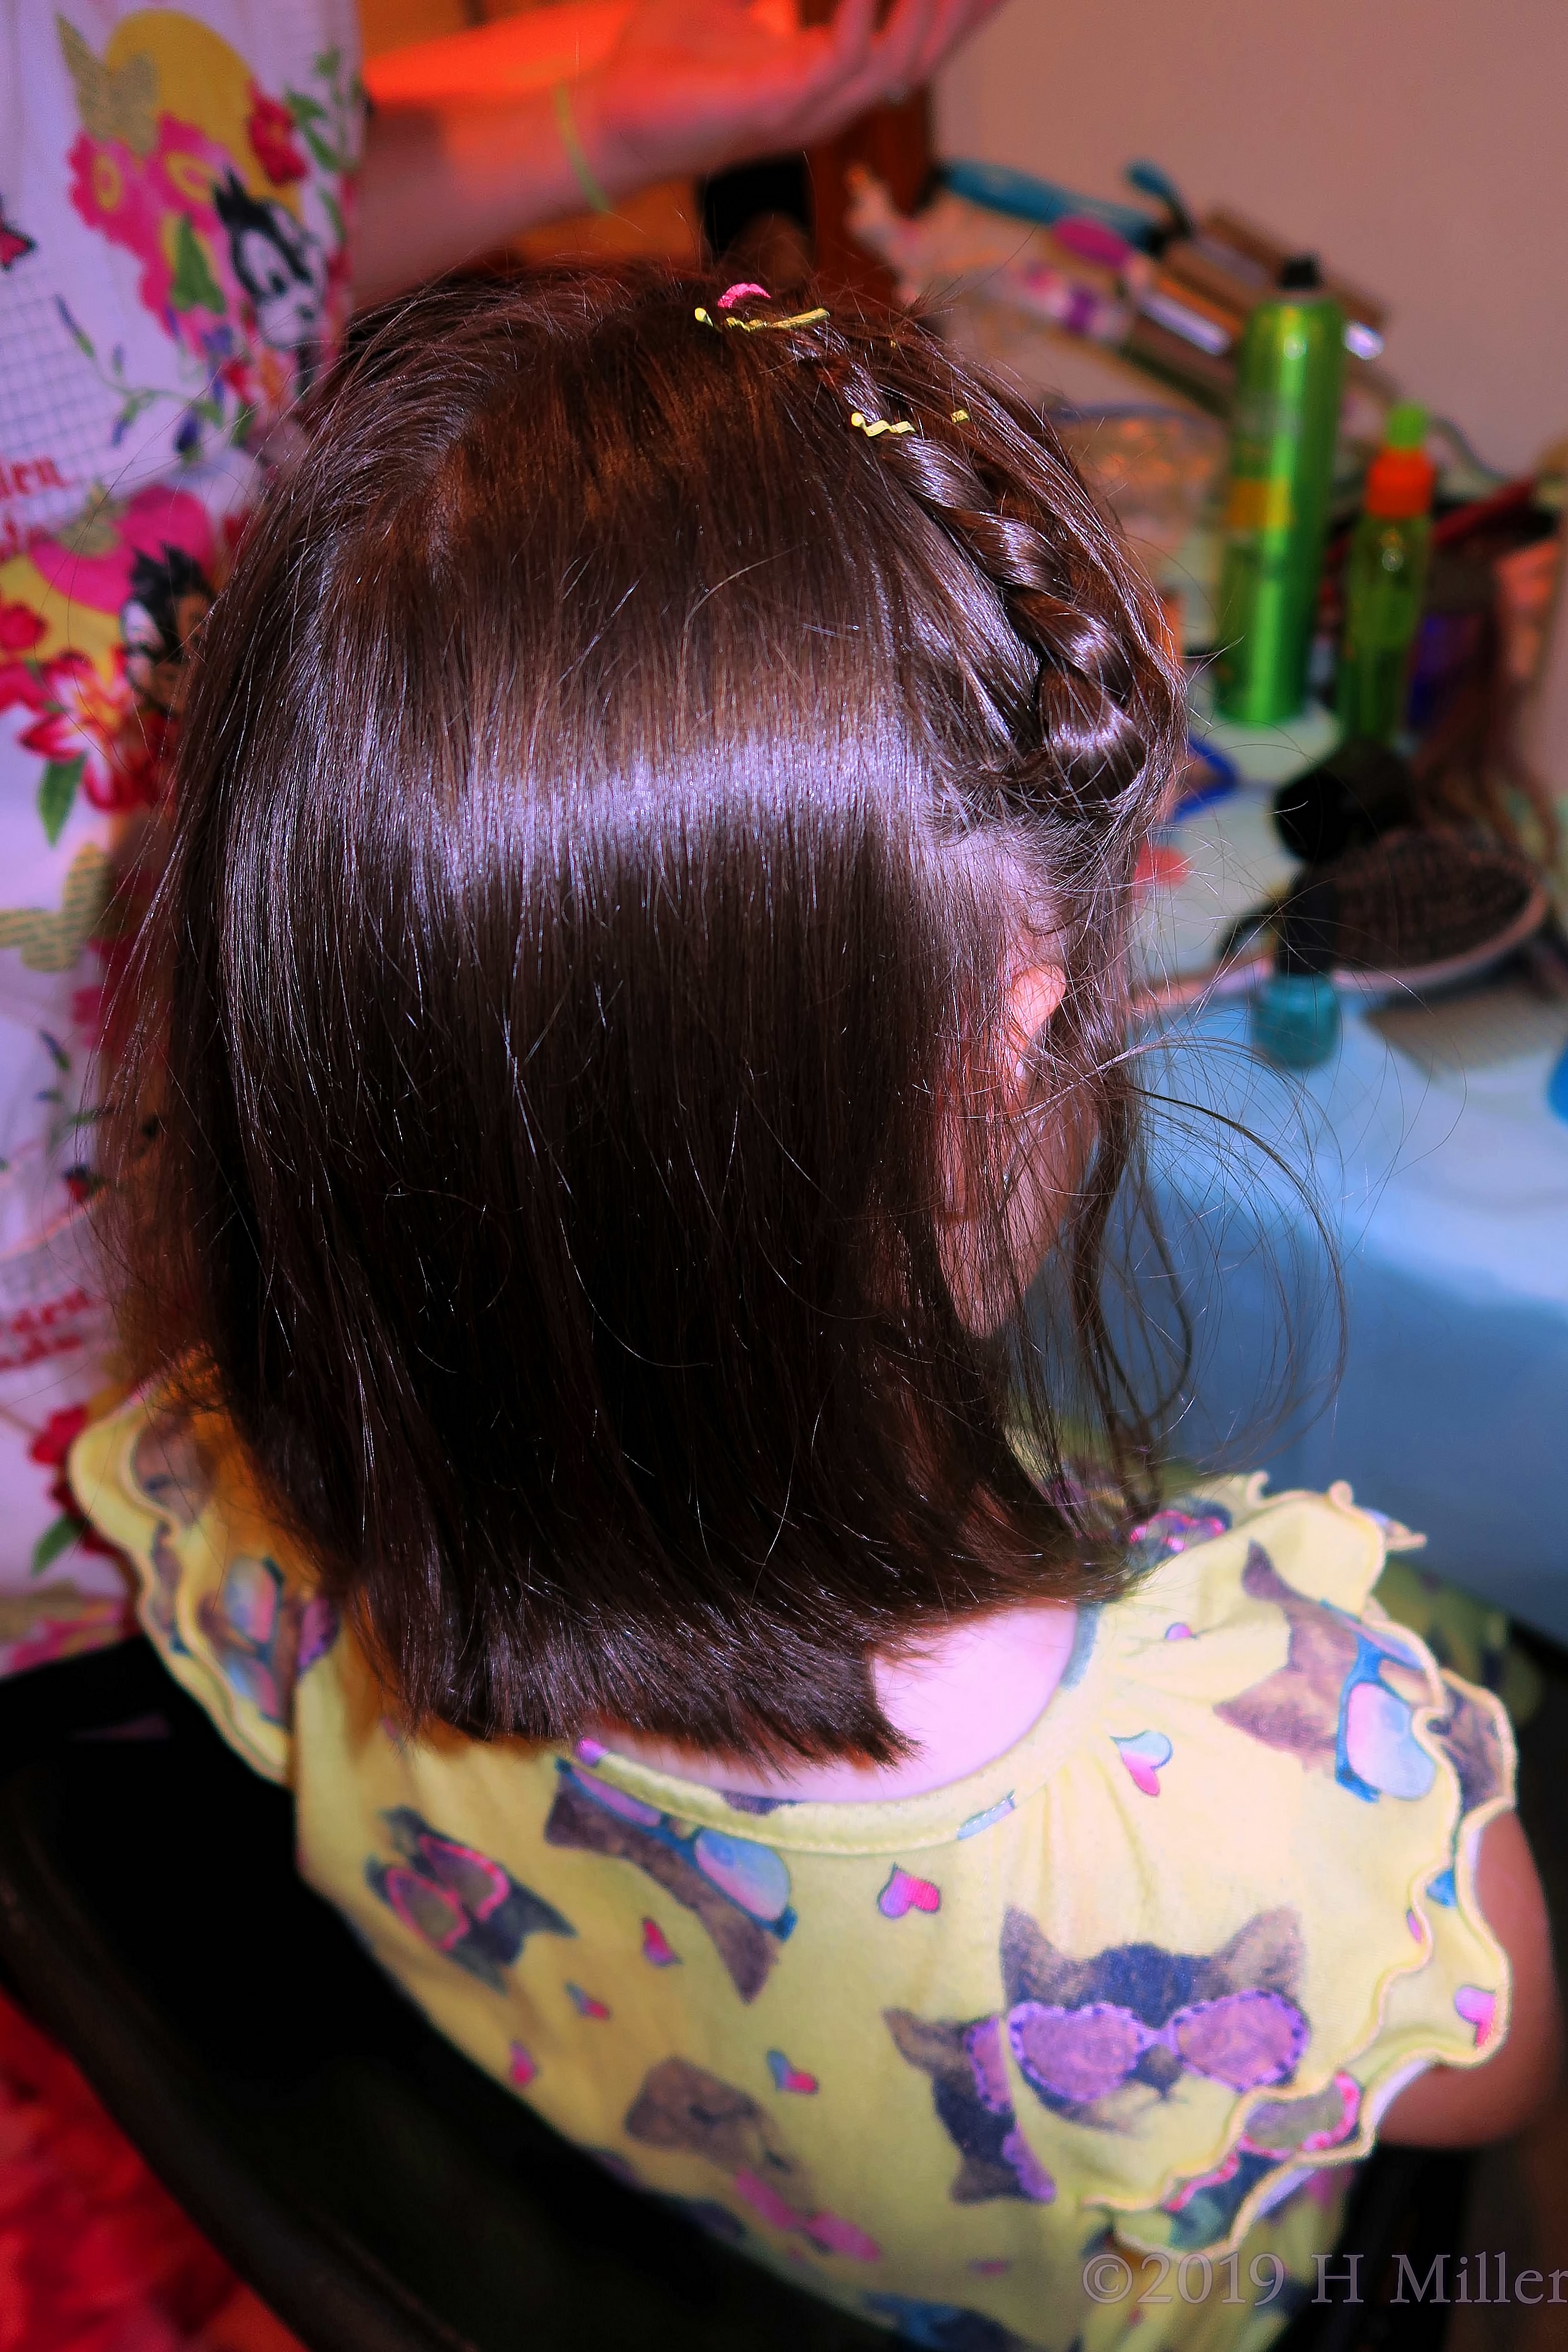 Braids And Back! Kids Hairstyle On Spa Party Guest! 4